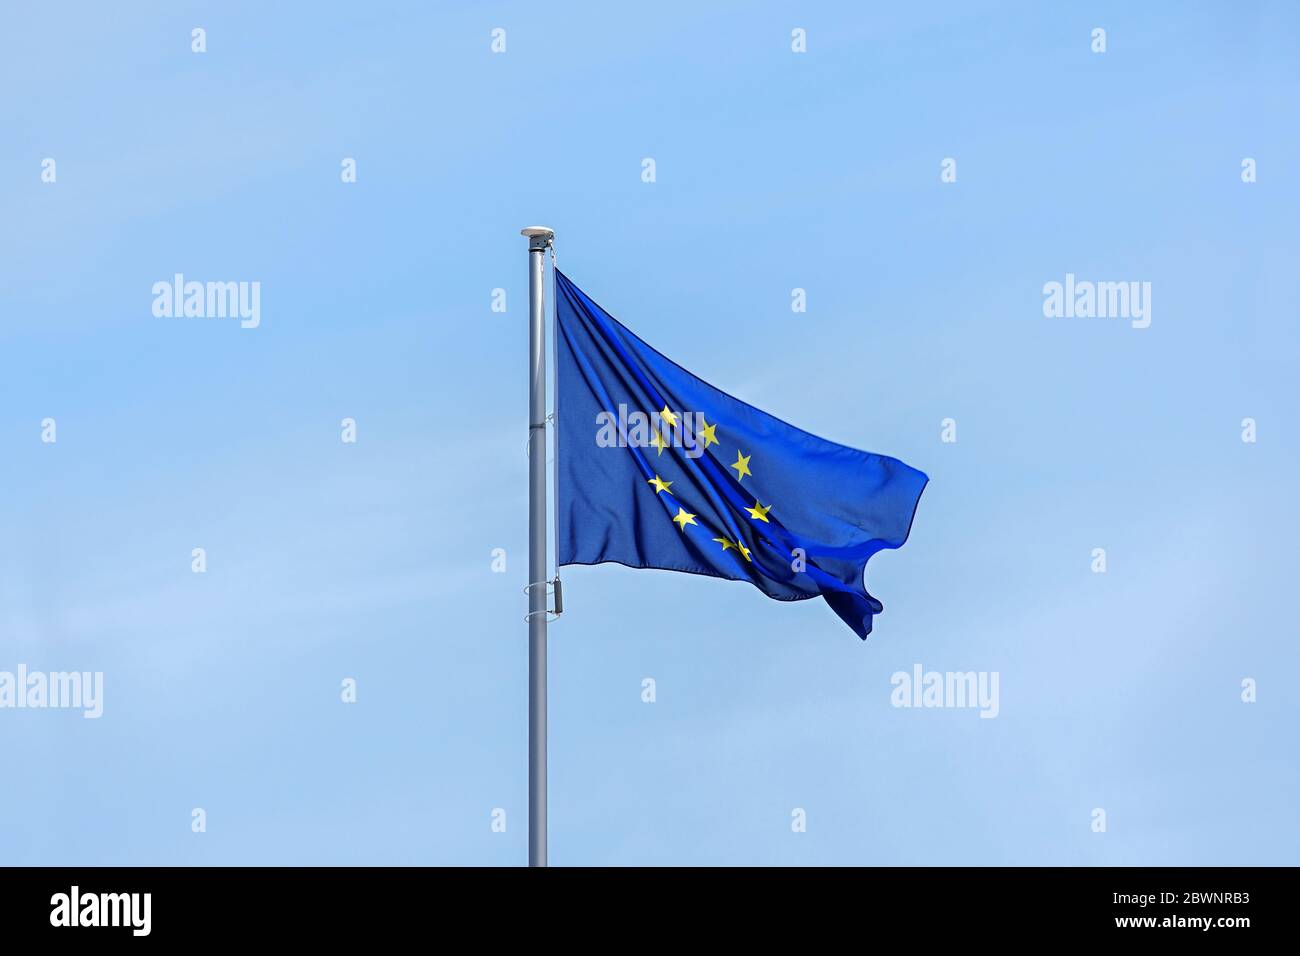 European flag with yellow stars for each member state on a blue background waving in the wind against a bright sky, large copy space on all sides, par Stock Photo